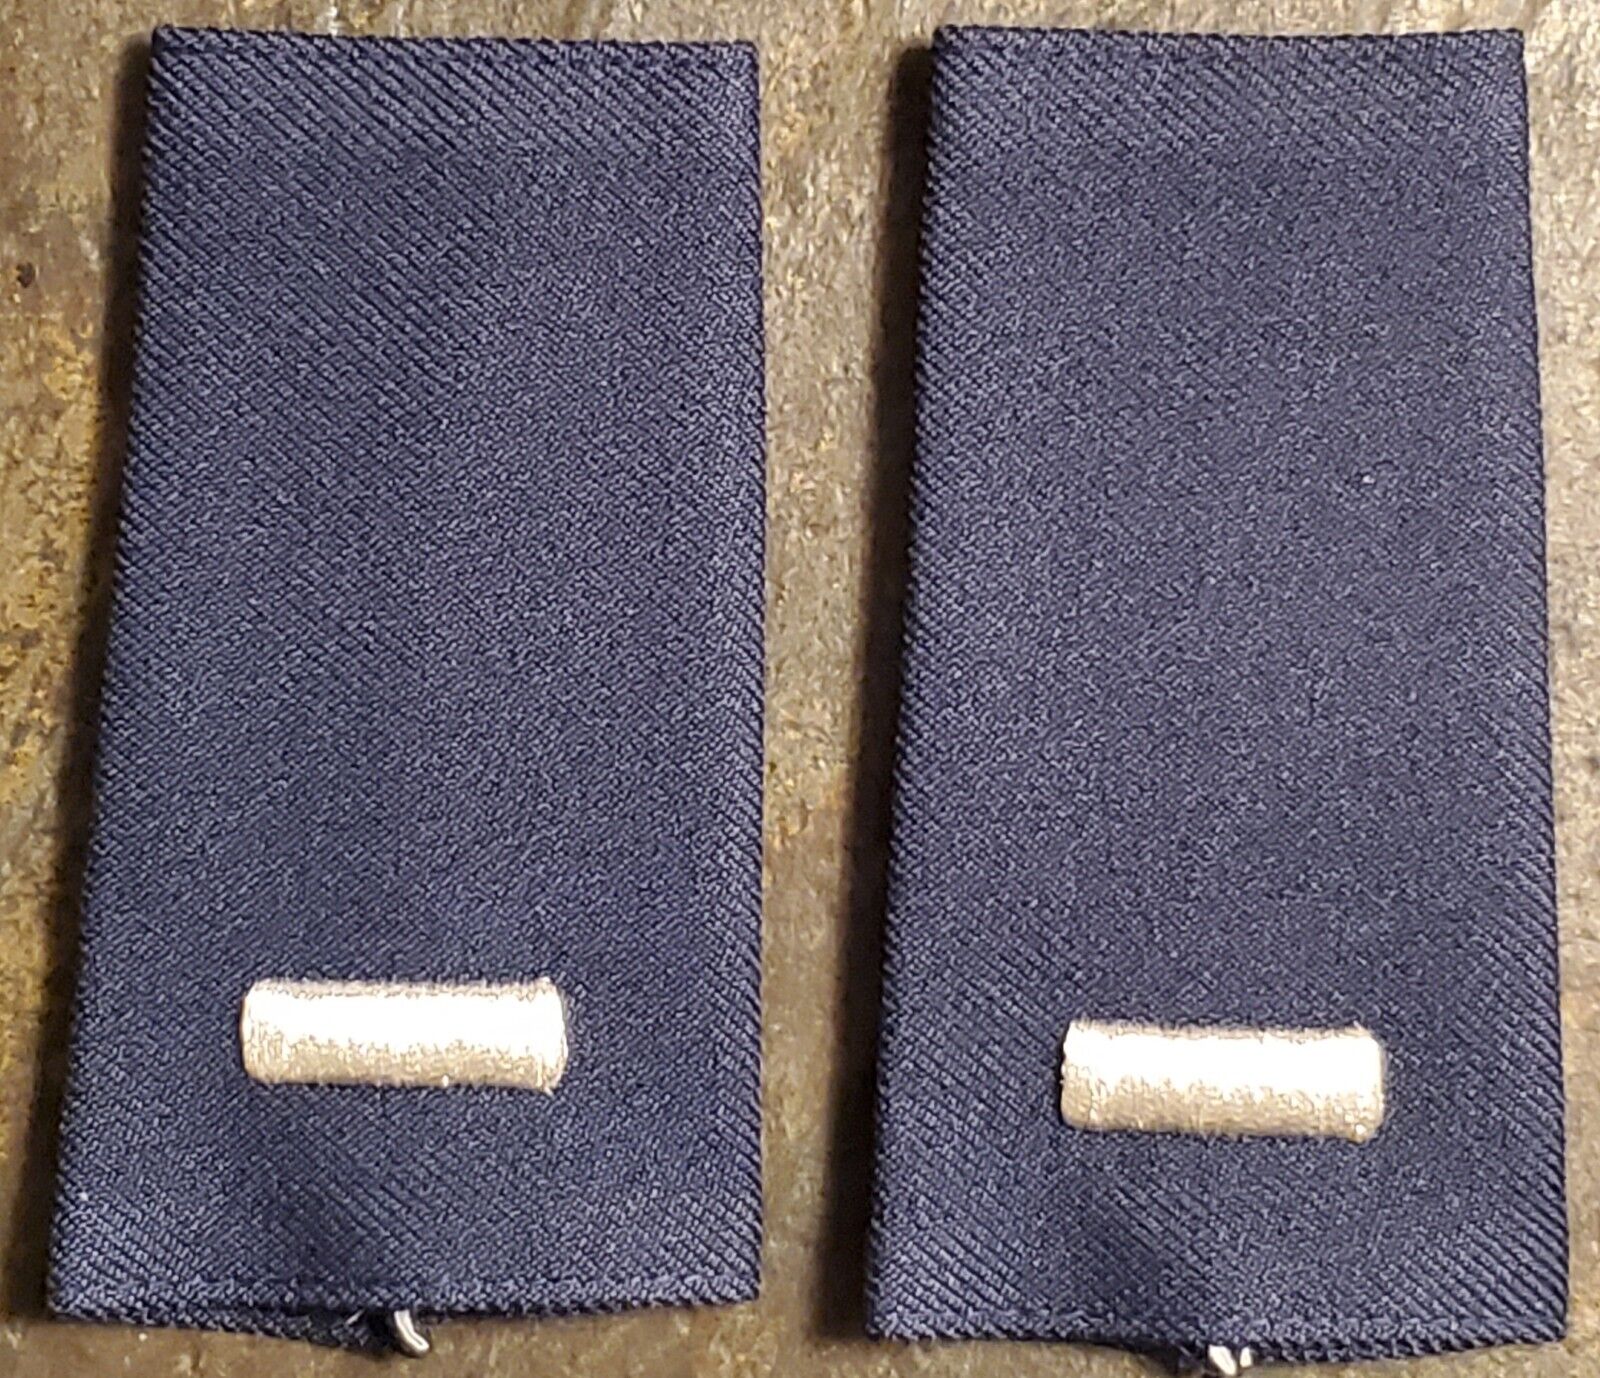 1 Pair (2pc) of USAF Air Force 1st LT Rank Large Epaulets *Never Worn* NOS blue